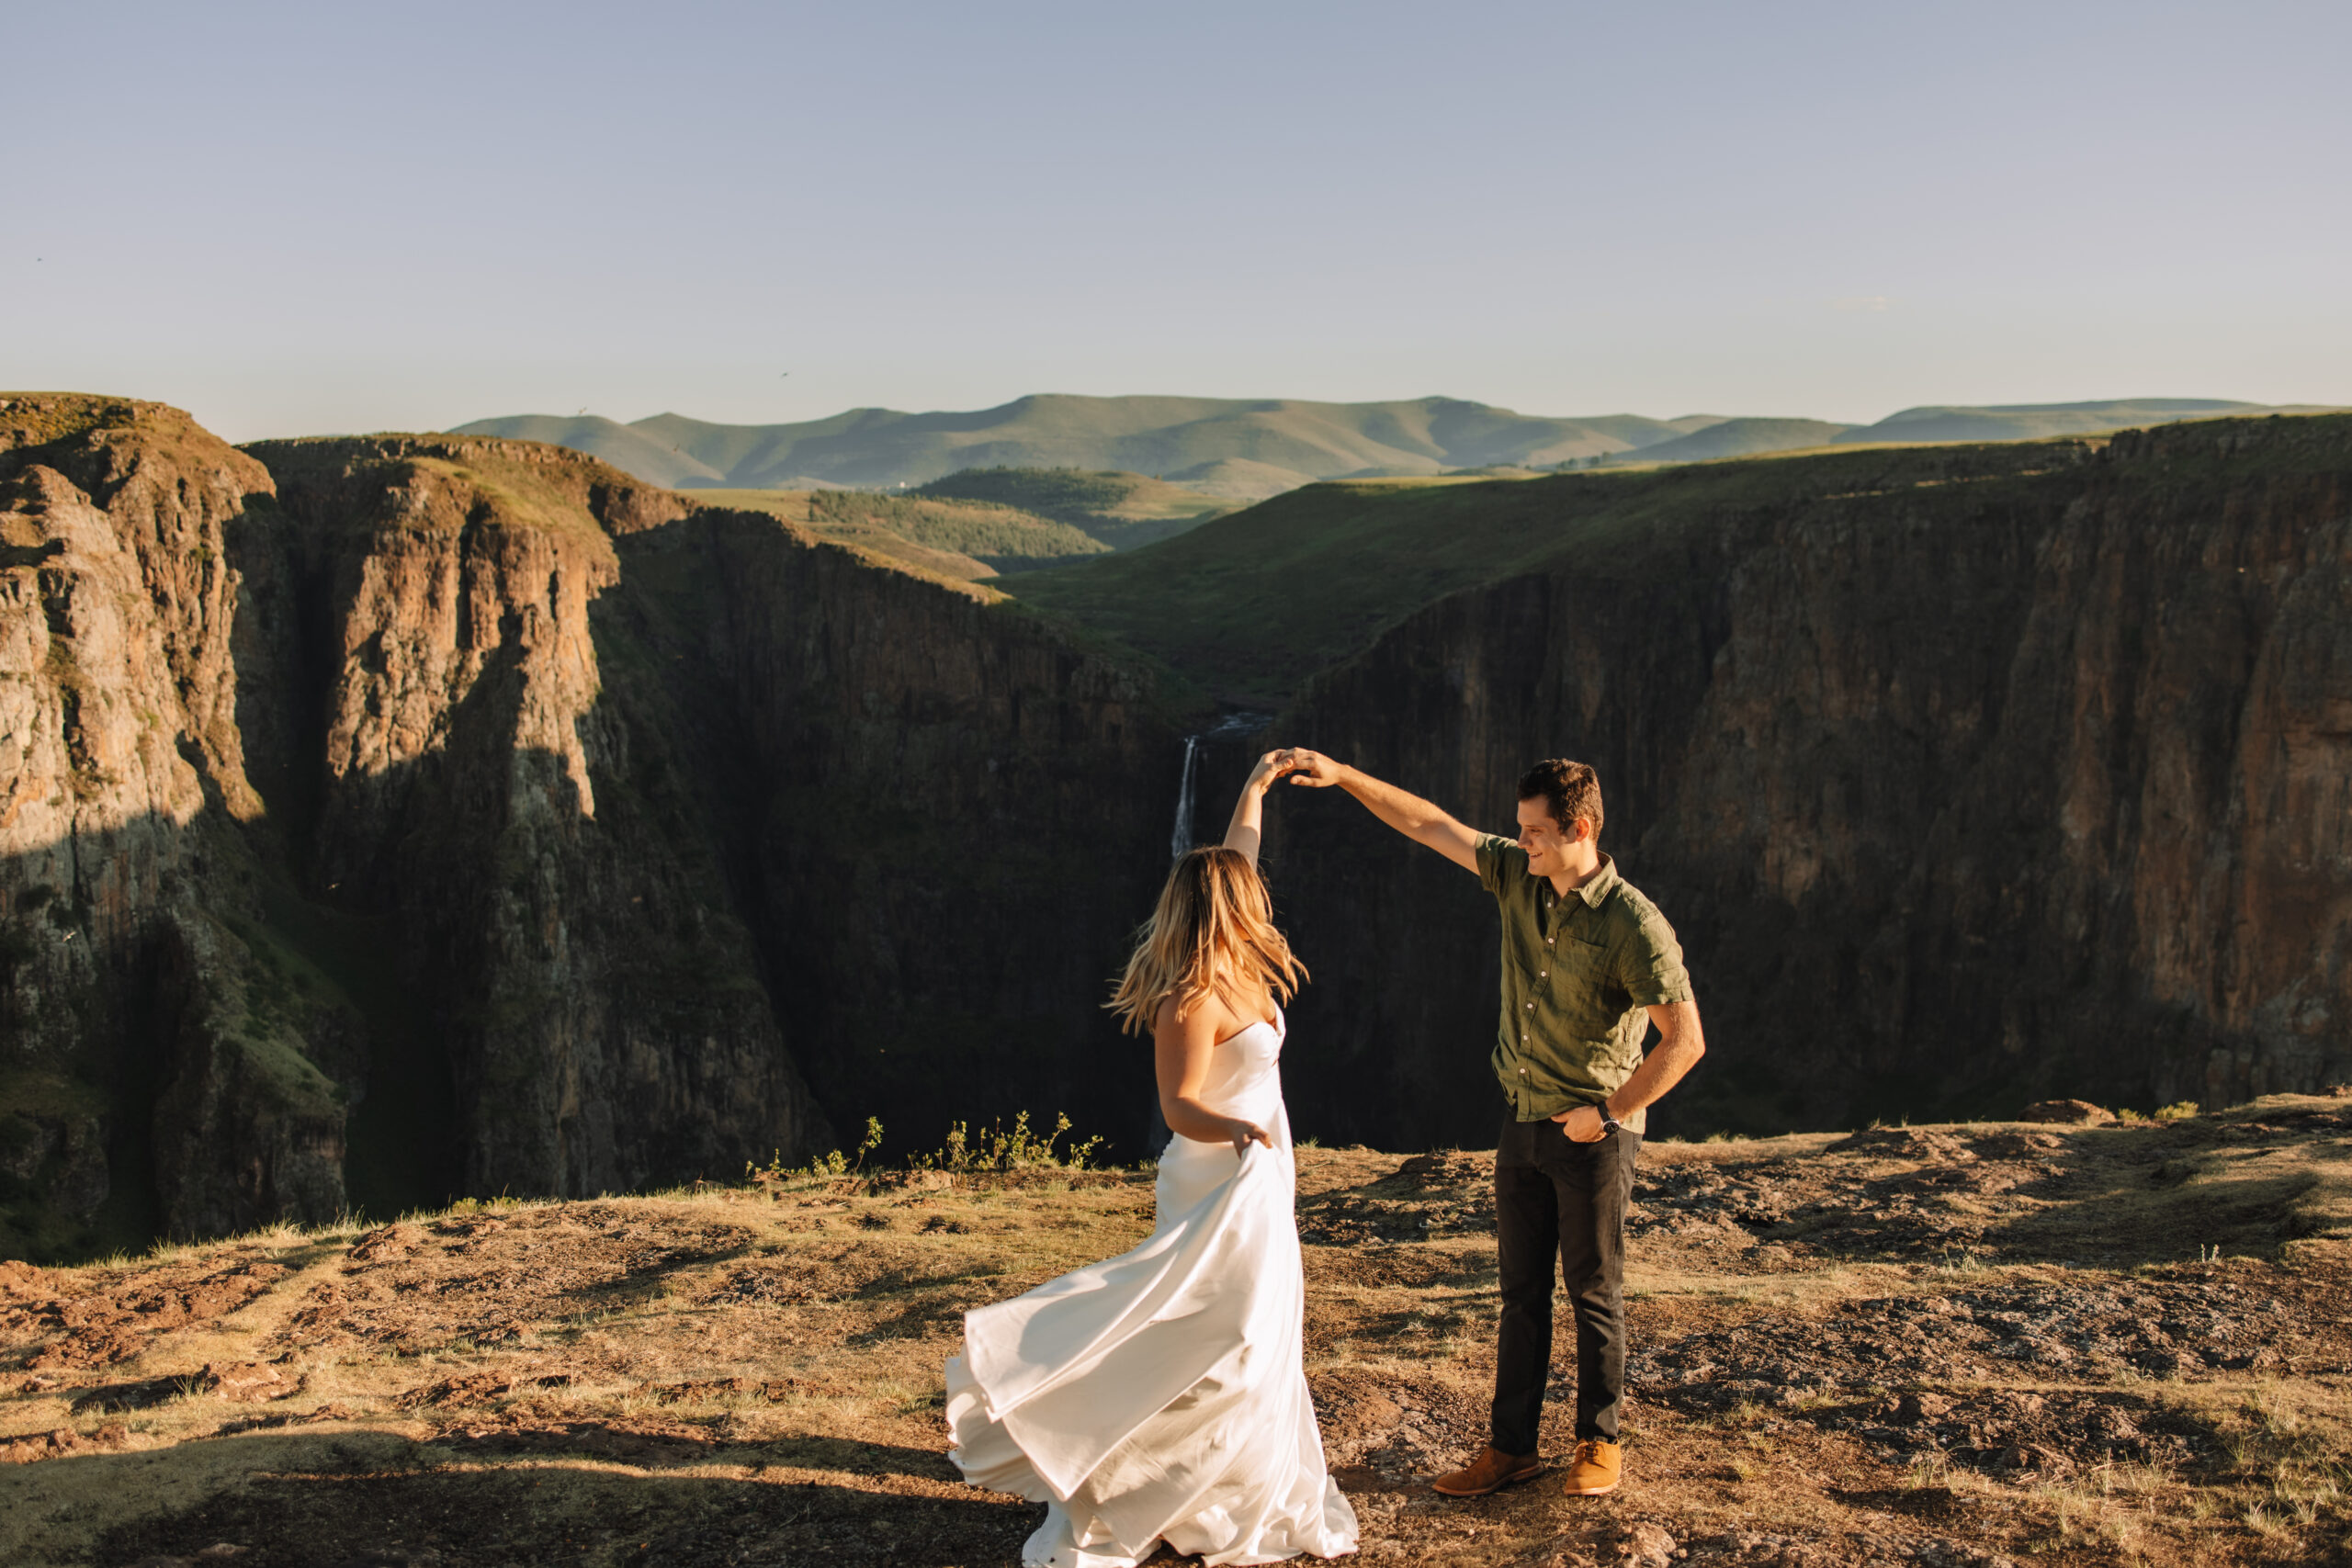 South Africa elopement couple dancing on the edge of a cliff as the sun is setting behind them across the green rolling hills